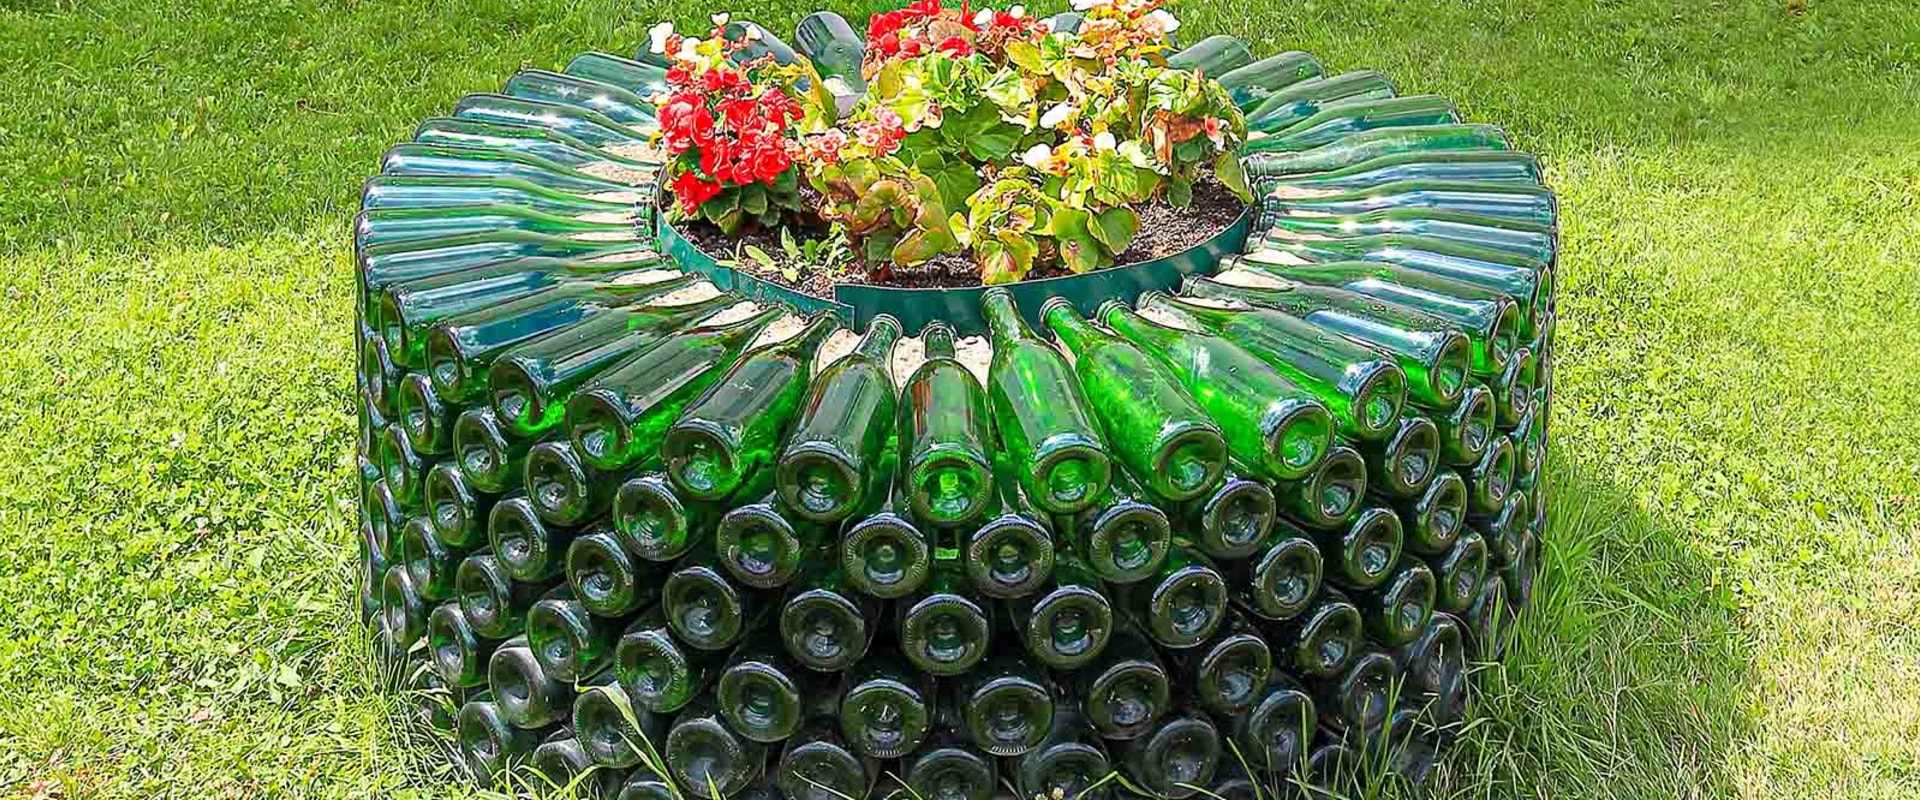 Repurposing Used Craft Beer Bottles and Cans: Creative Ways to Upcycle Your Craft Beer Accessories